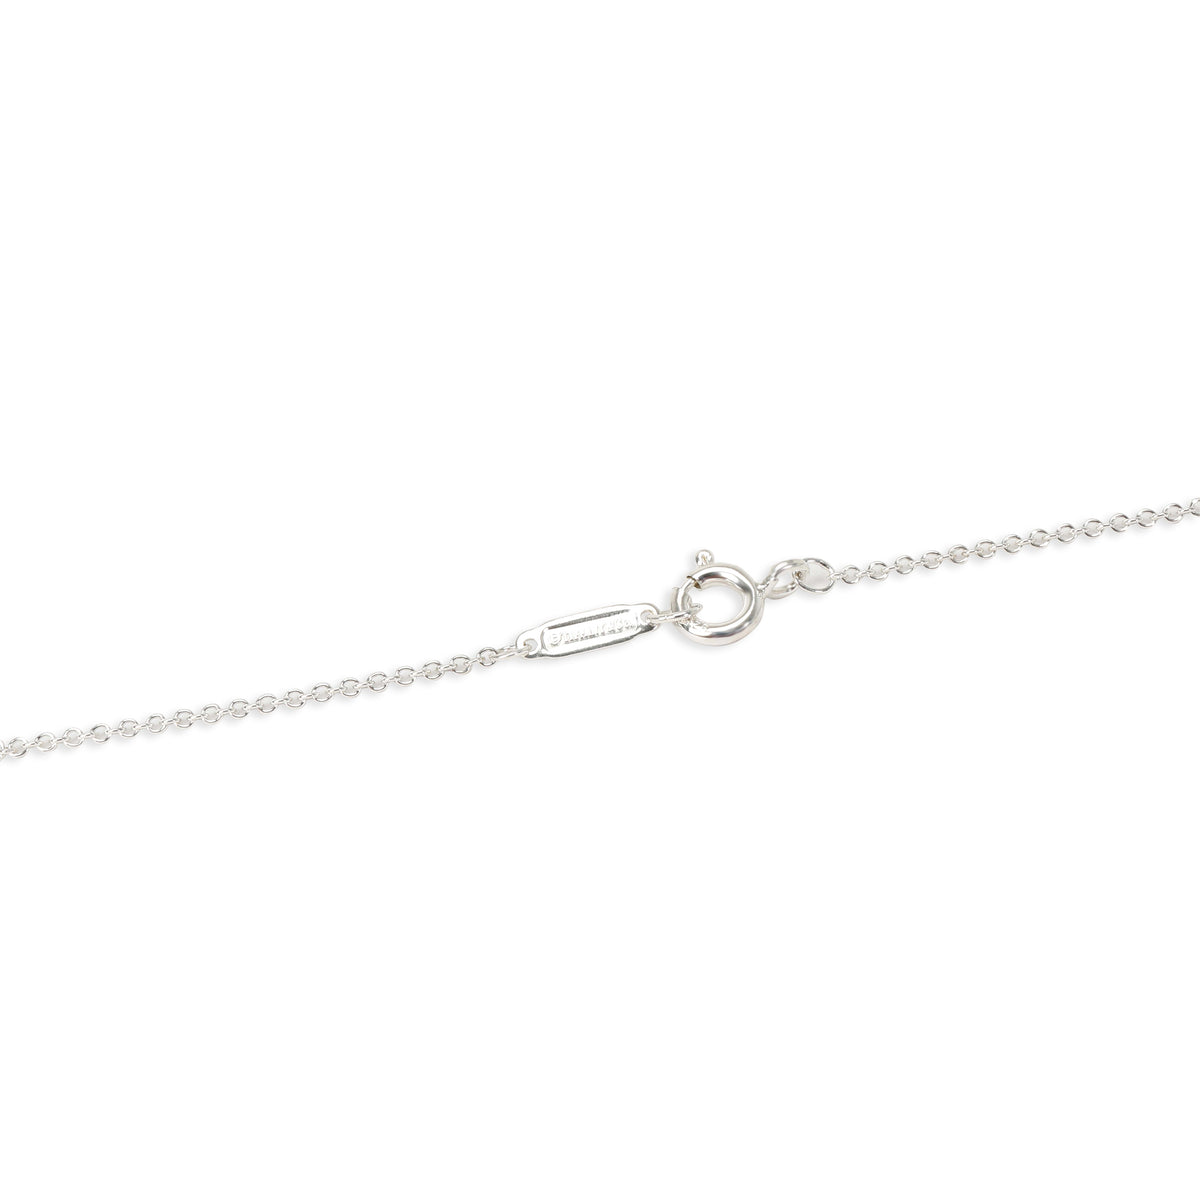 Tiffany & Co. Somerset Knot Necklace in  Sterling Silver